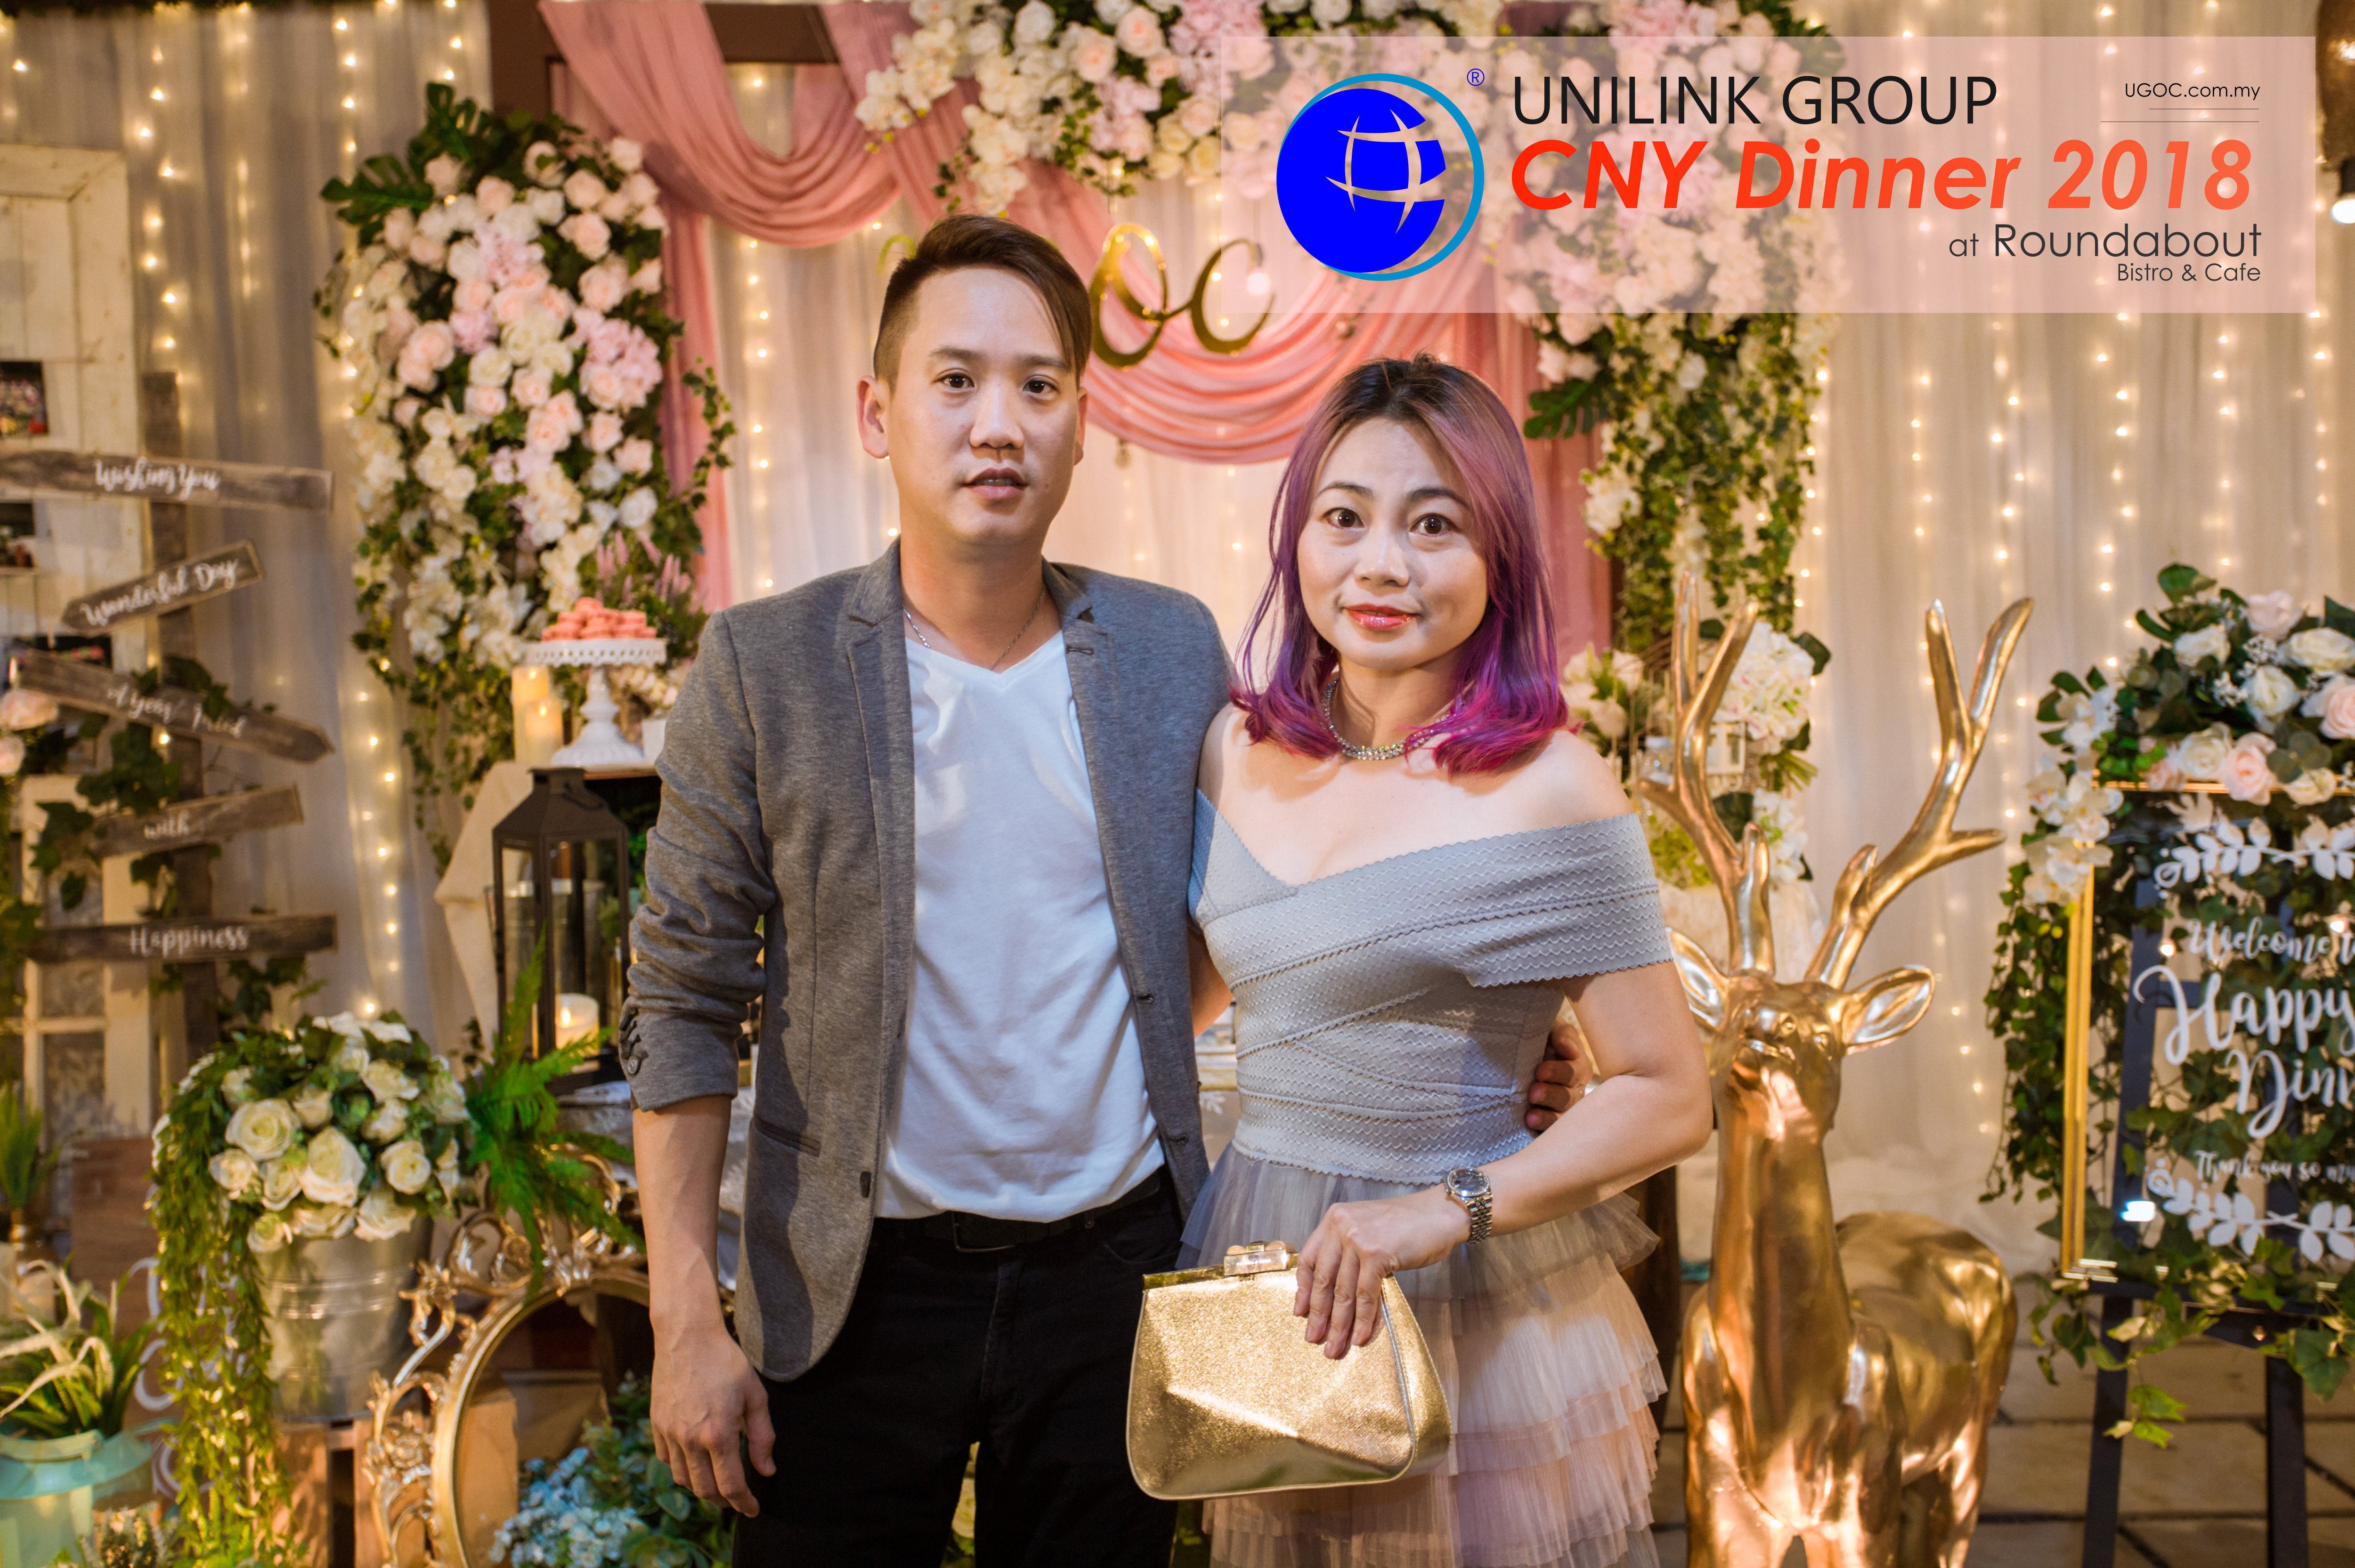 Unilink Group Chinese New Year Dinner 2018 from Agensi Pekerjaan Unilink Prospects Sdn Bhd at Roundabout Bisrto and Cafe 19